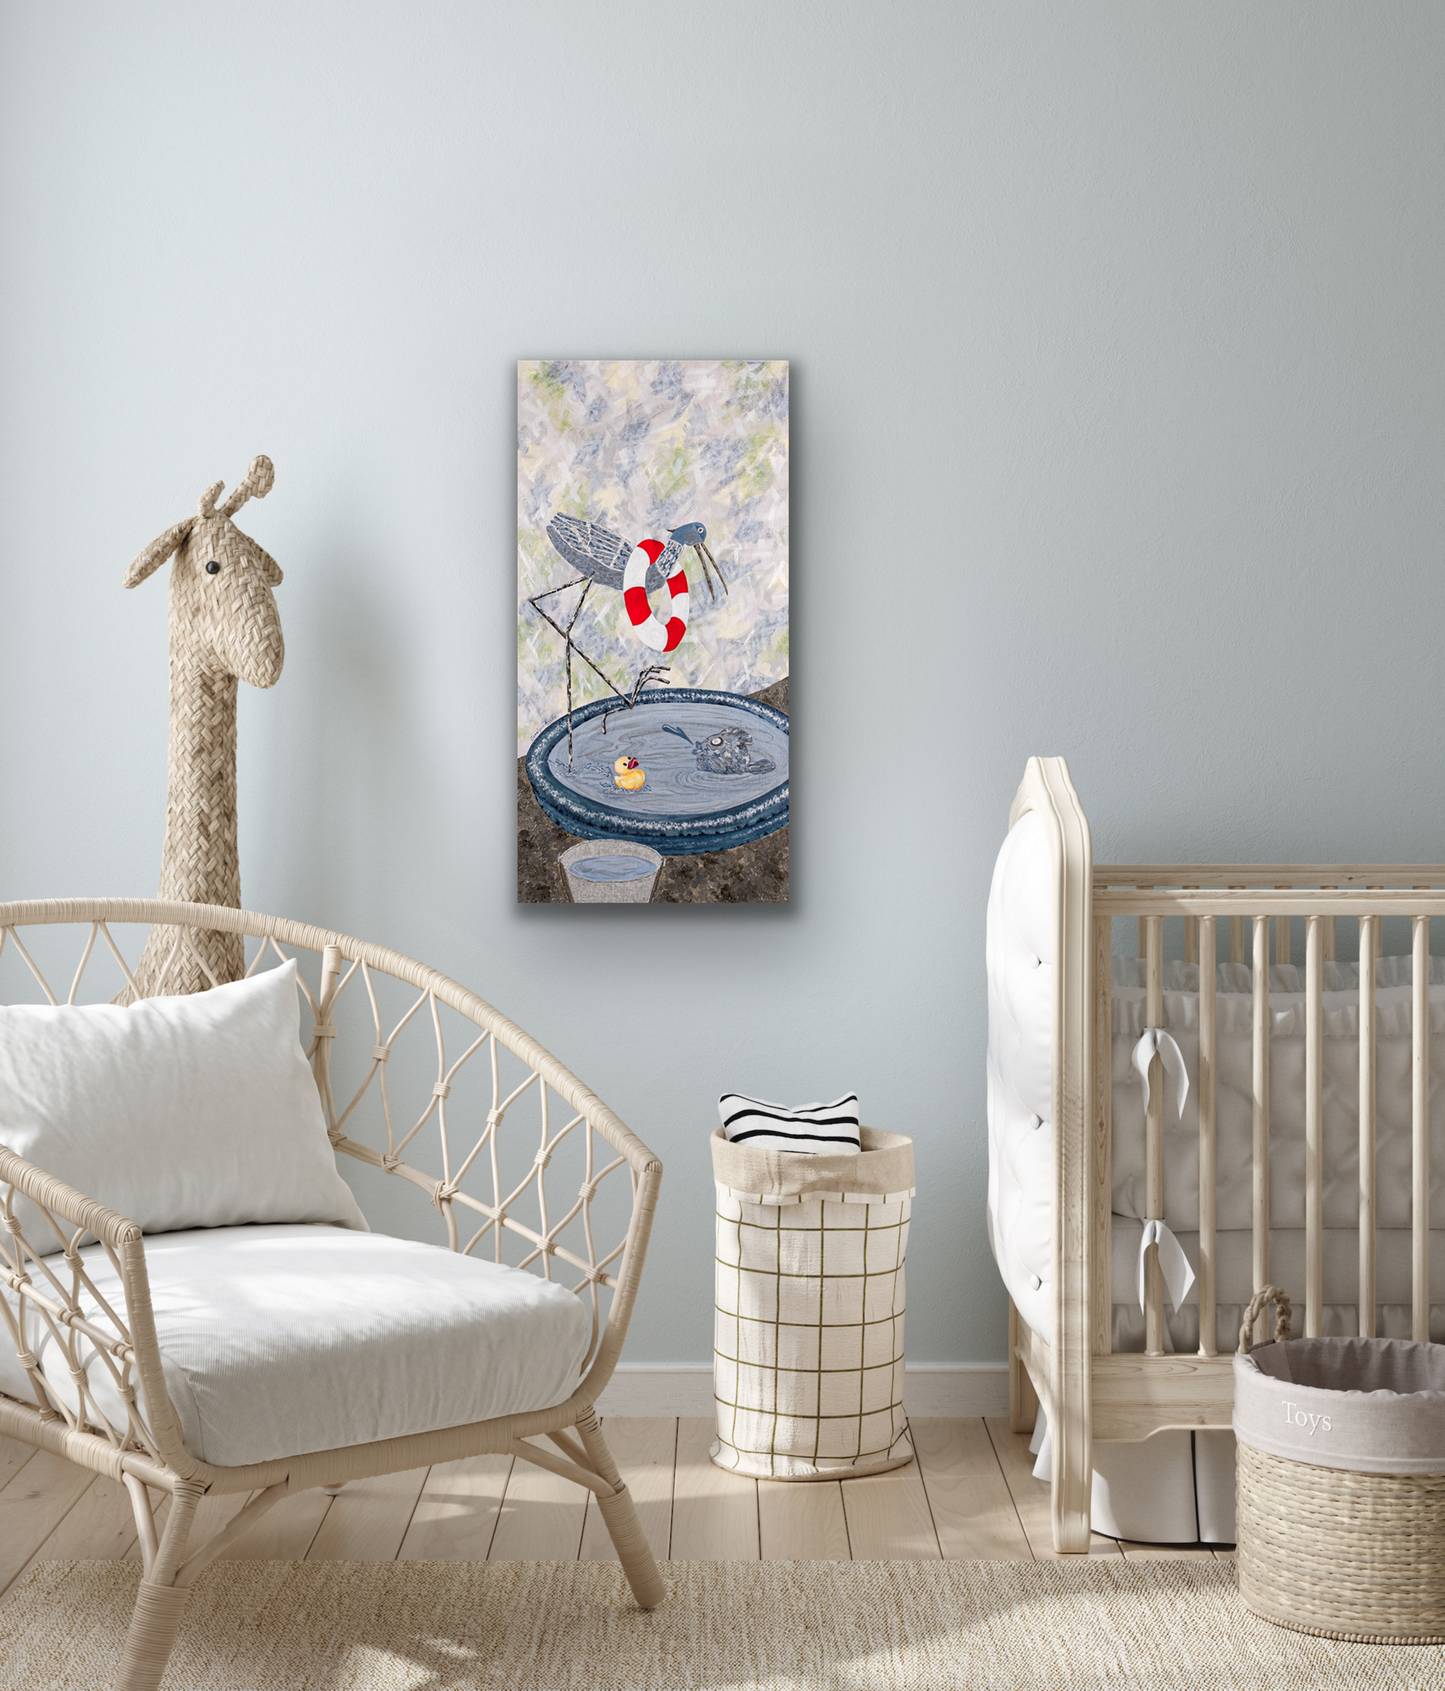 "Lessons" work of art will look great in a nursery or kid's room. 